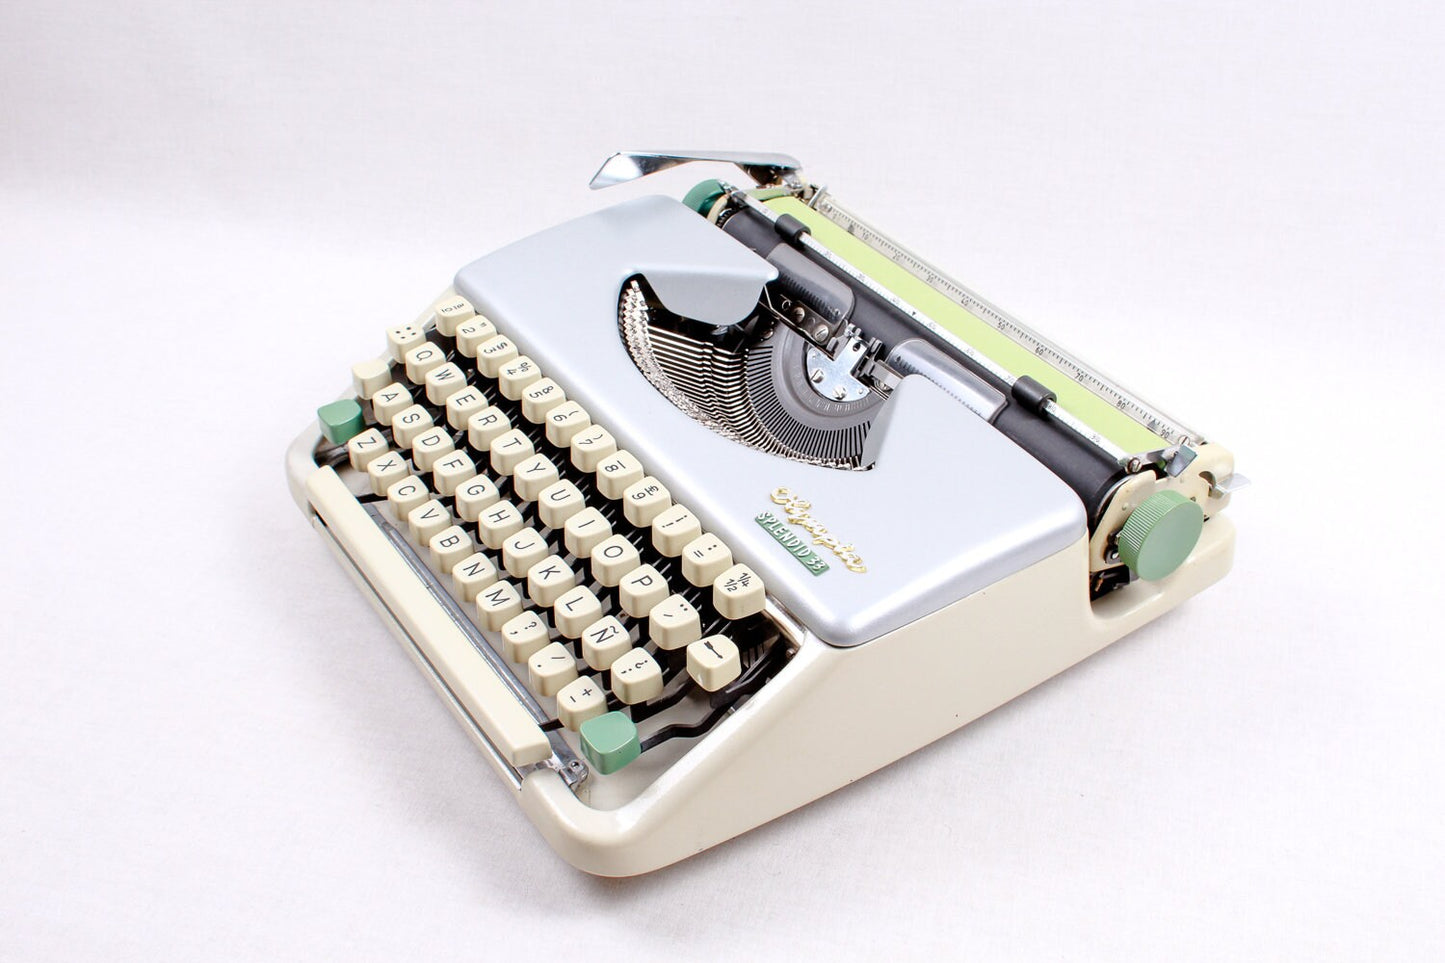 SALE! - Olympia Splendid 33 Cream & Silver Typewriter, Vintage, Mint Condition, Professionally Serviced